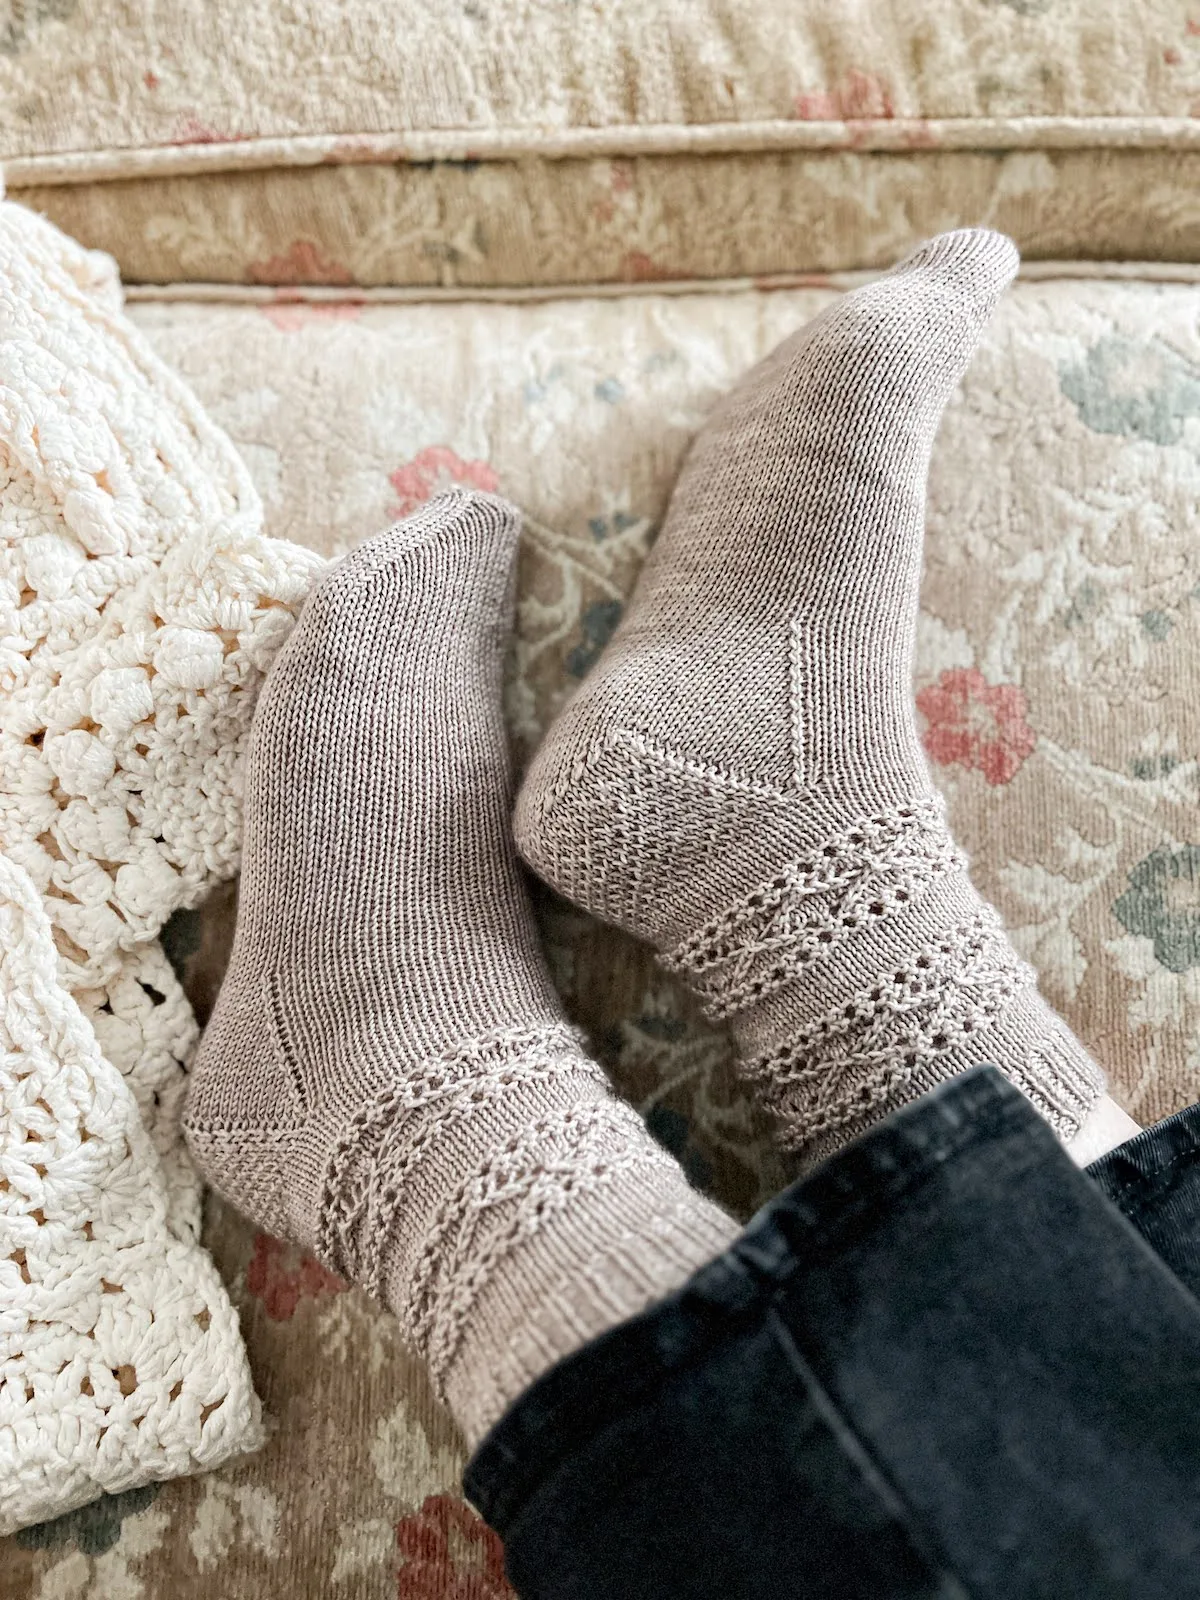 A pair of feet wearing pearly gray handknit socks with a richly textured leg and eye of partridge heel are settled on their side against a tan couch cushion with pink and blue flowers on it.